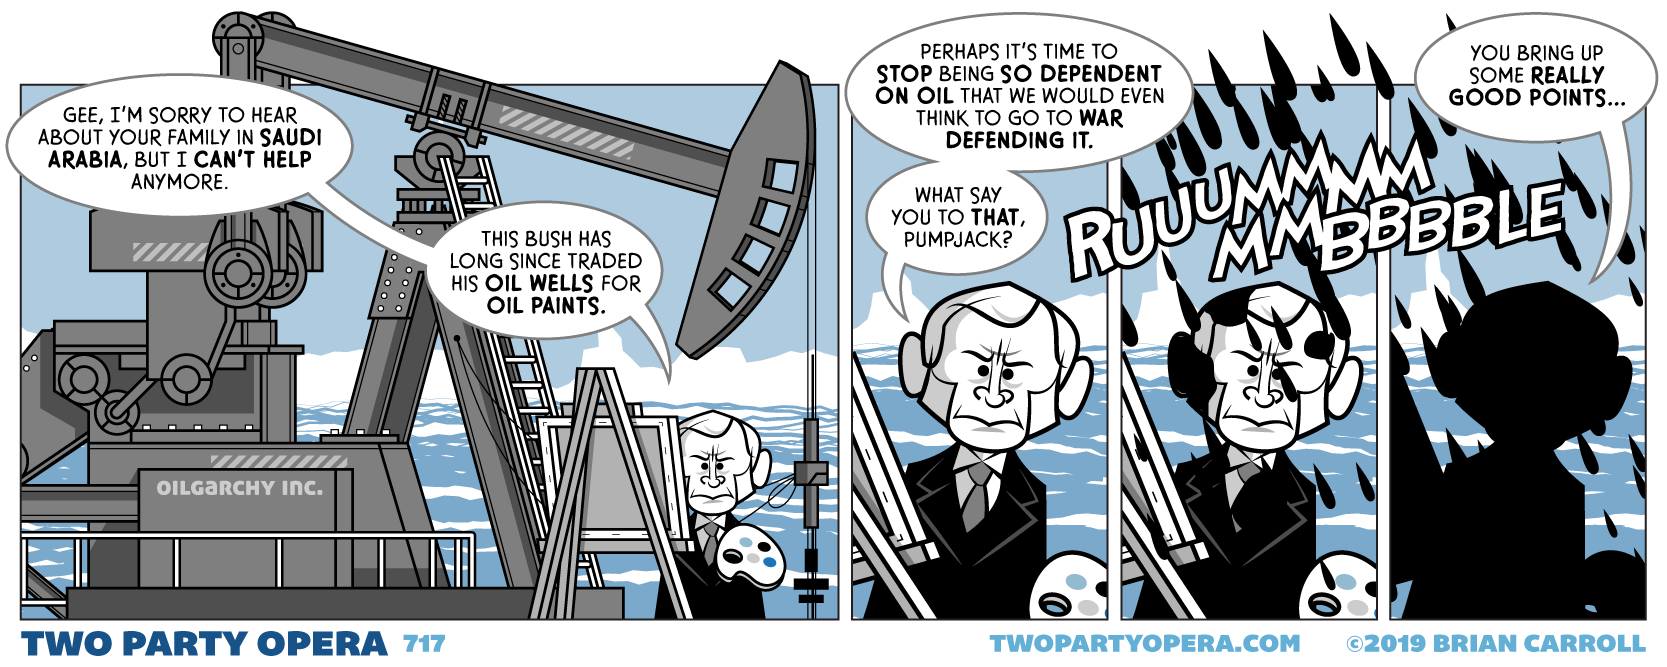 Oil You Glad I Didn’t Say…